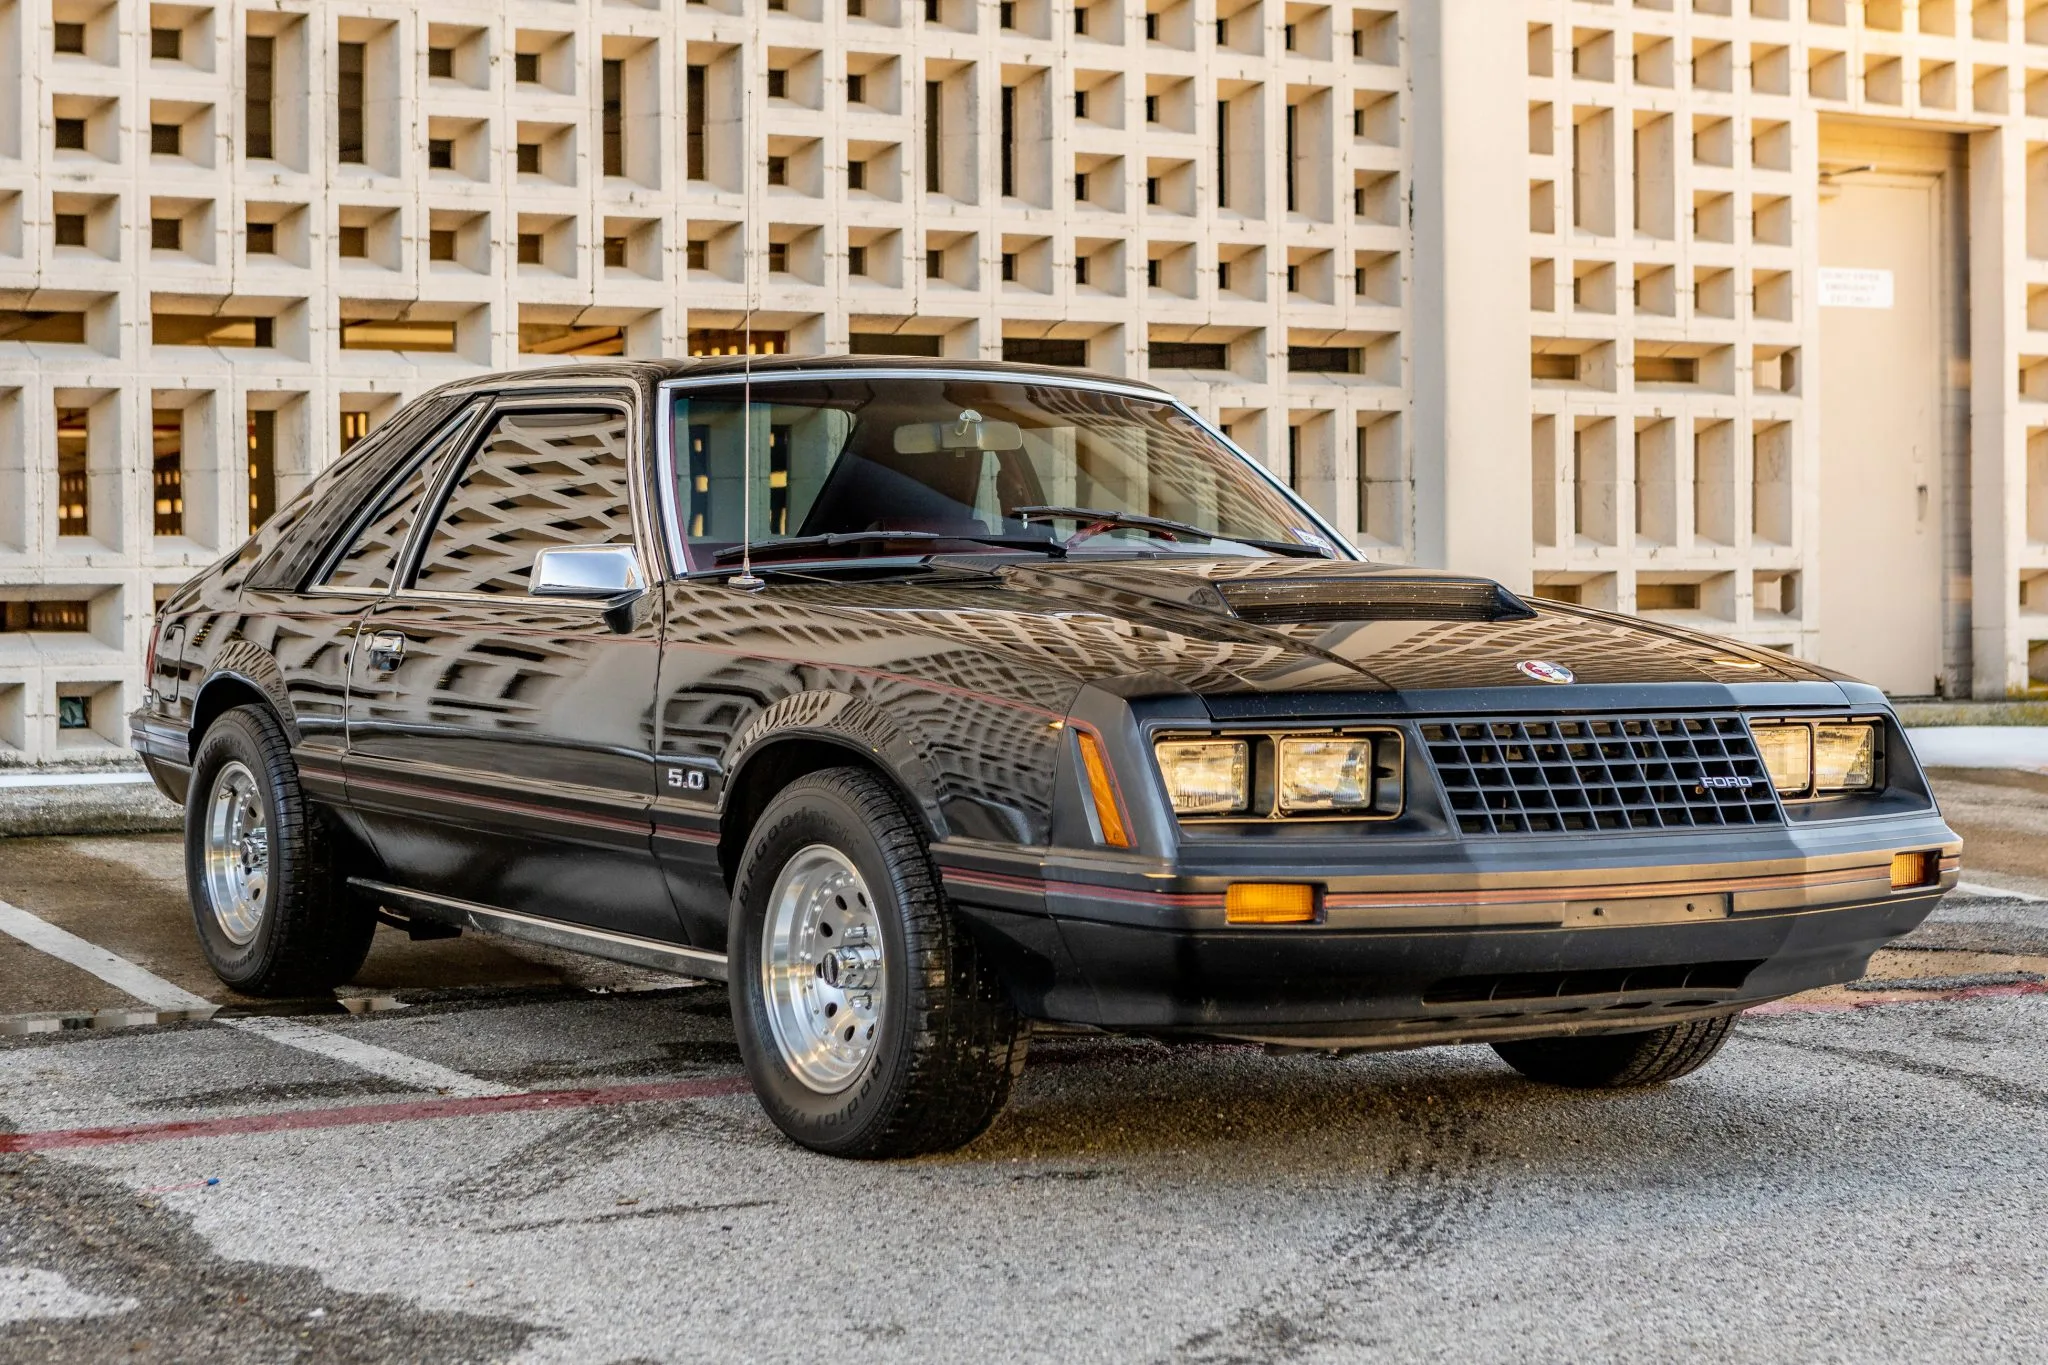 Mustang Of The Day: 1982 Ford Mustang GLX